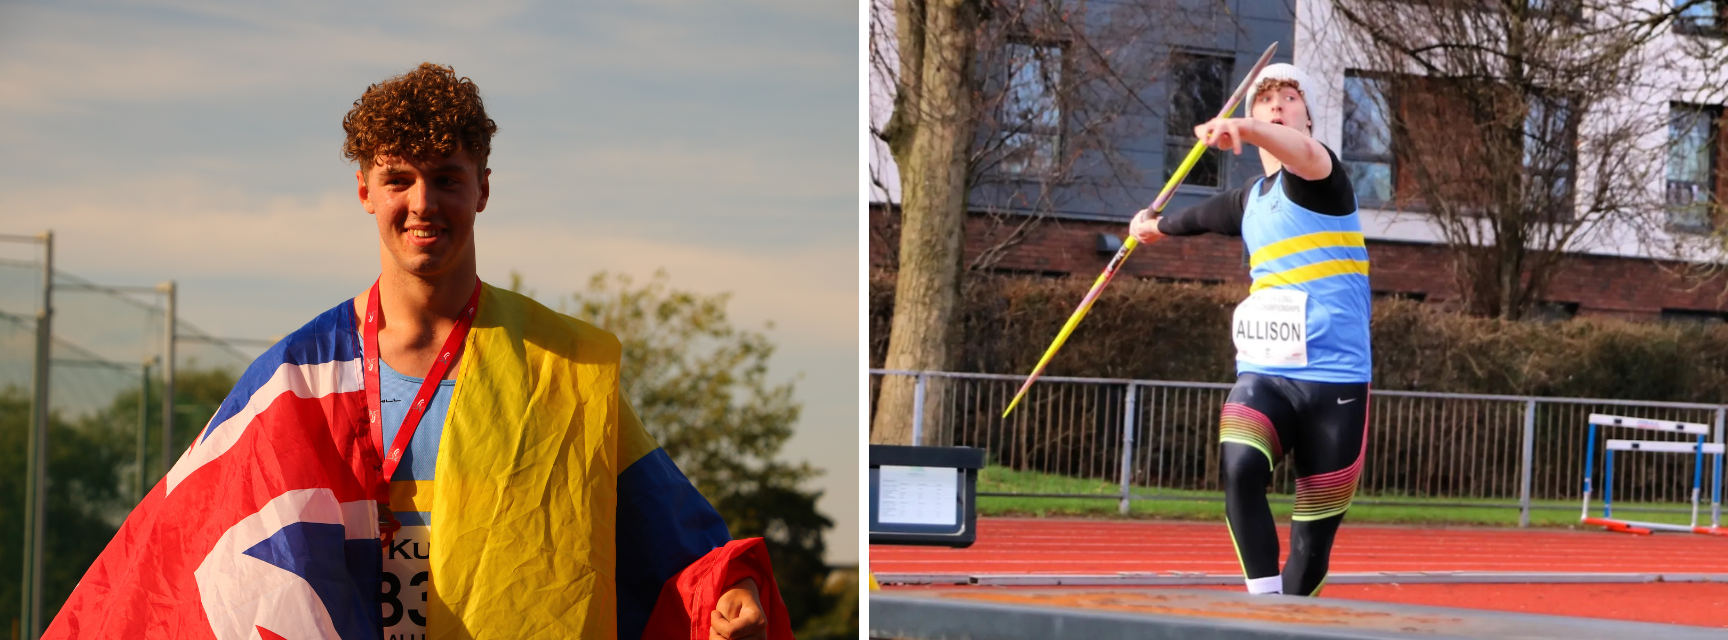 Profile image of Michael Allison next to an image of him throwing a Javelin